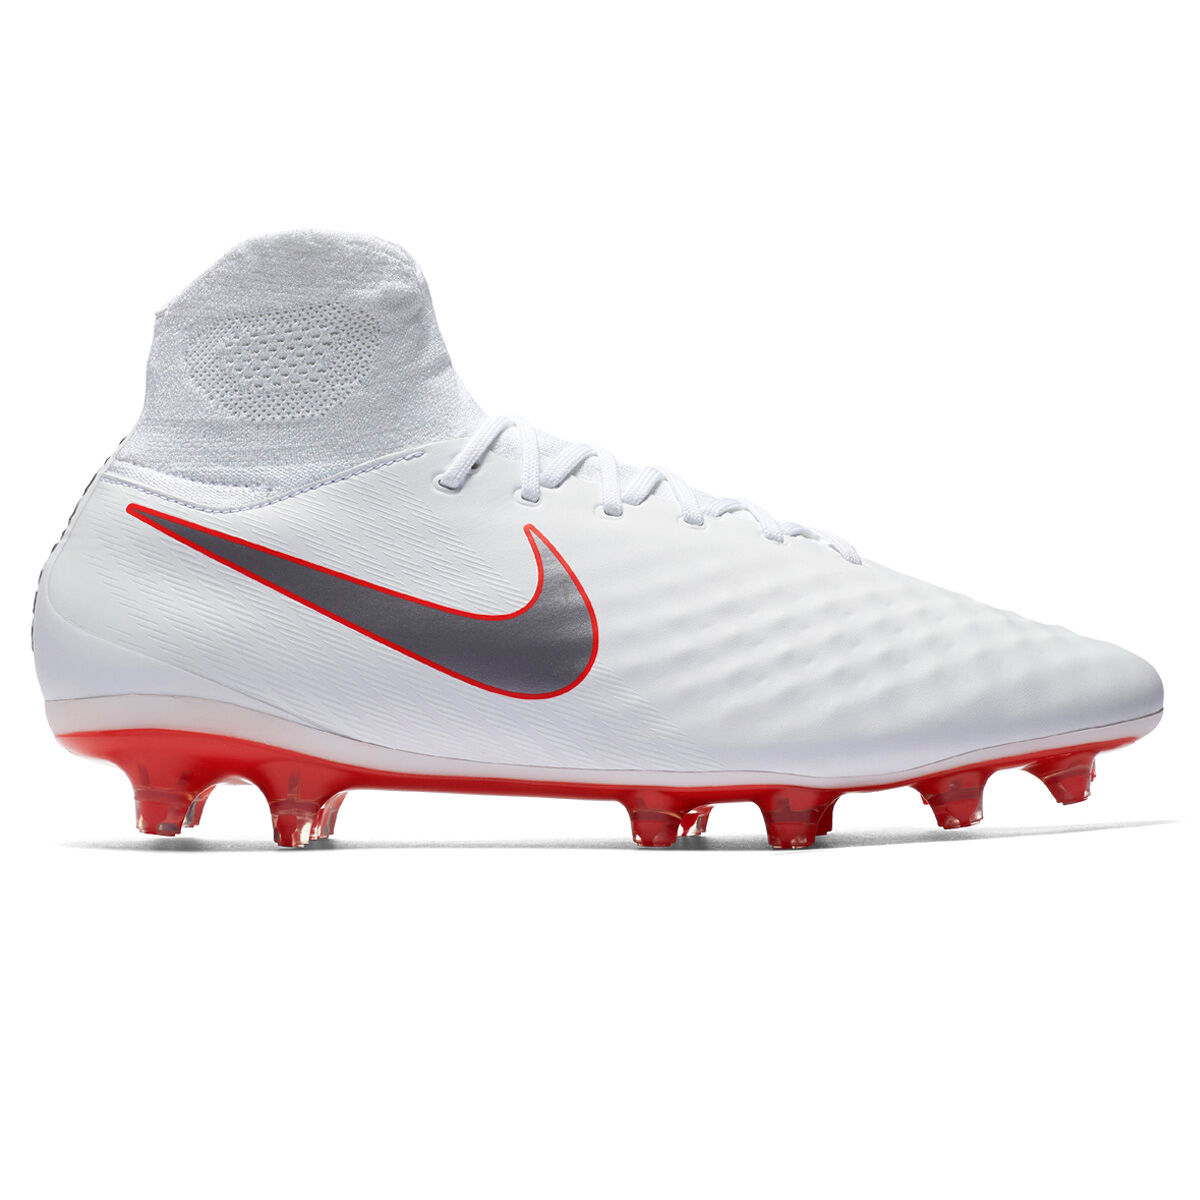 white magistas Cheaper Than Retail Price\u003e Buy Clothing, Accessories and  lifestyle products for women \u0026 men -